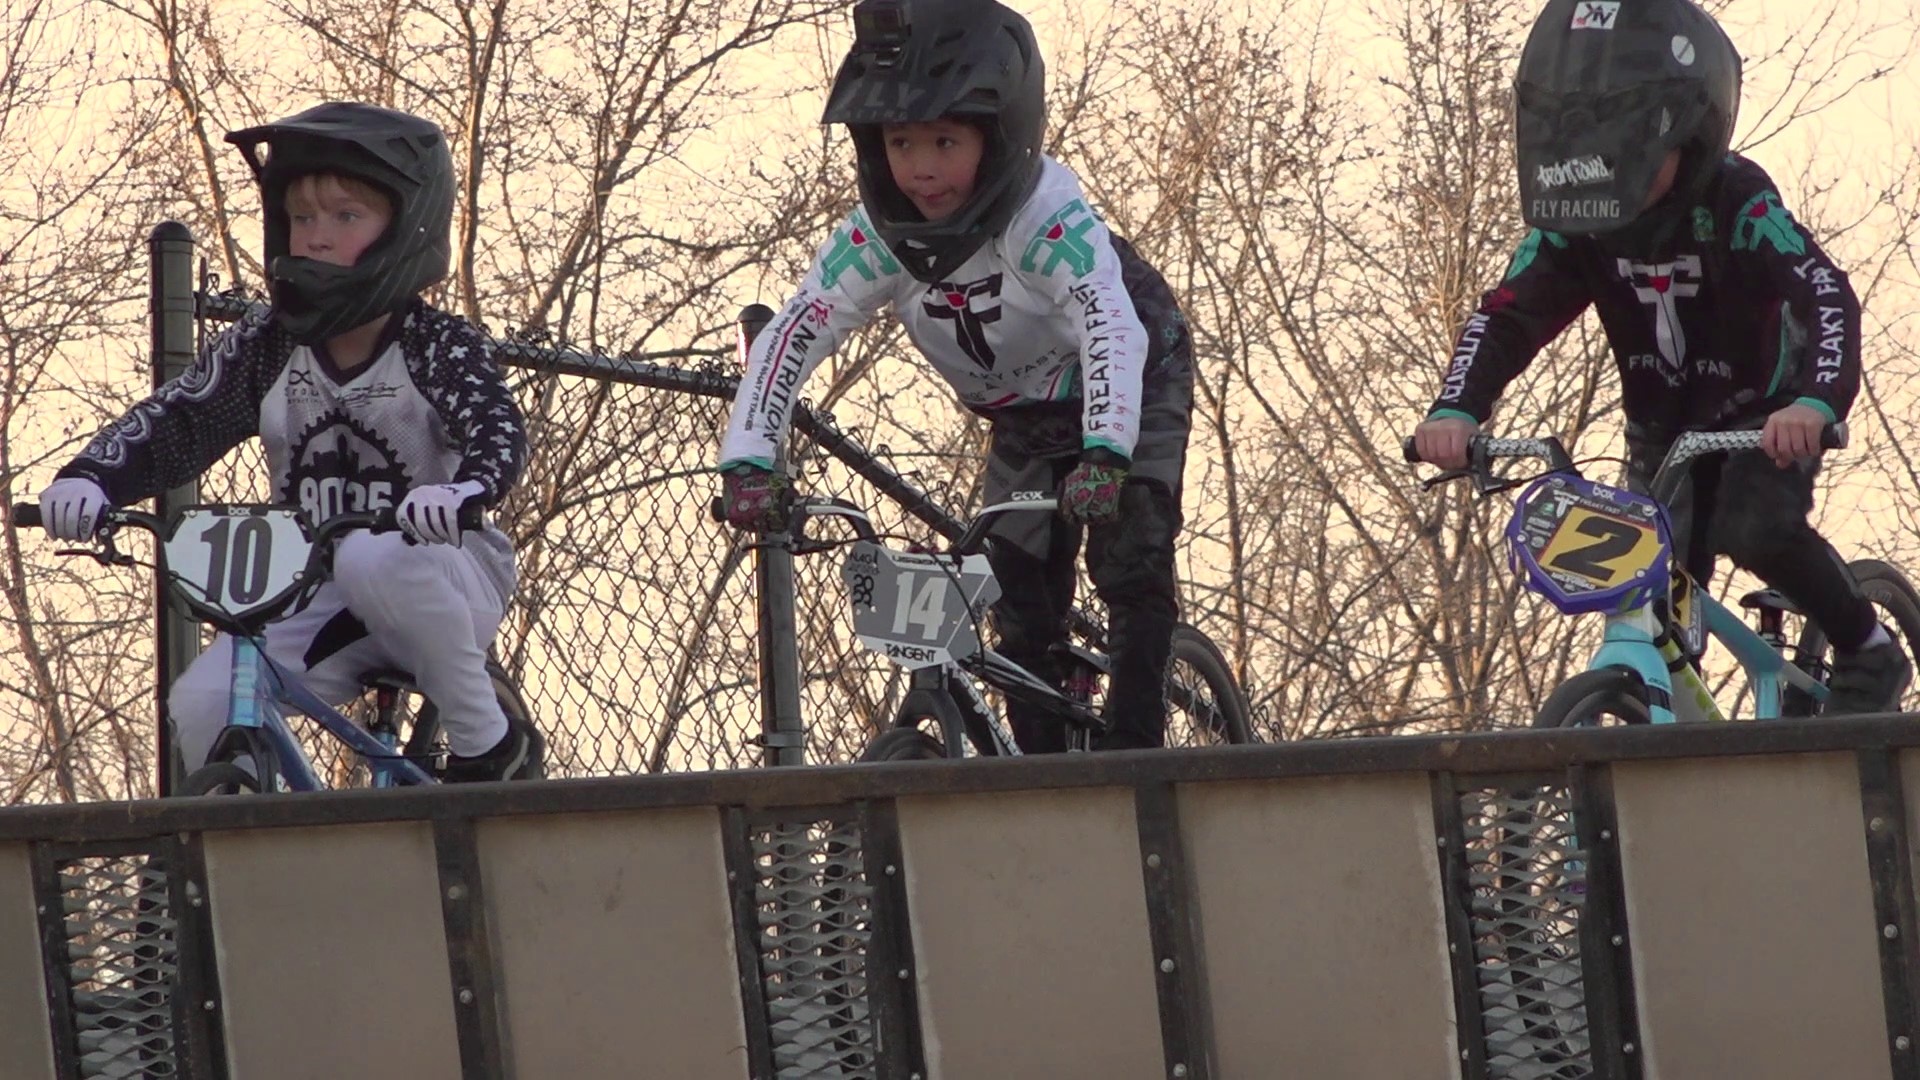 In 2023, Asher King took home first-place in the Race of Champions, earning him a spot to compete in the BMX World Championships in May 2024.